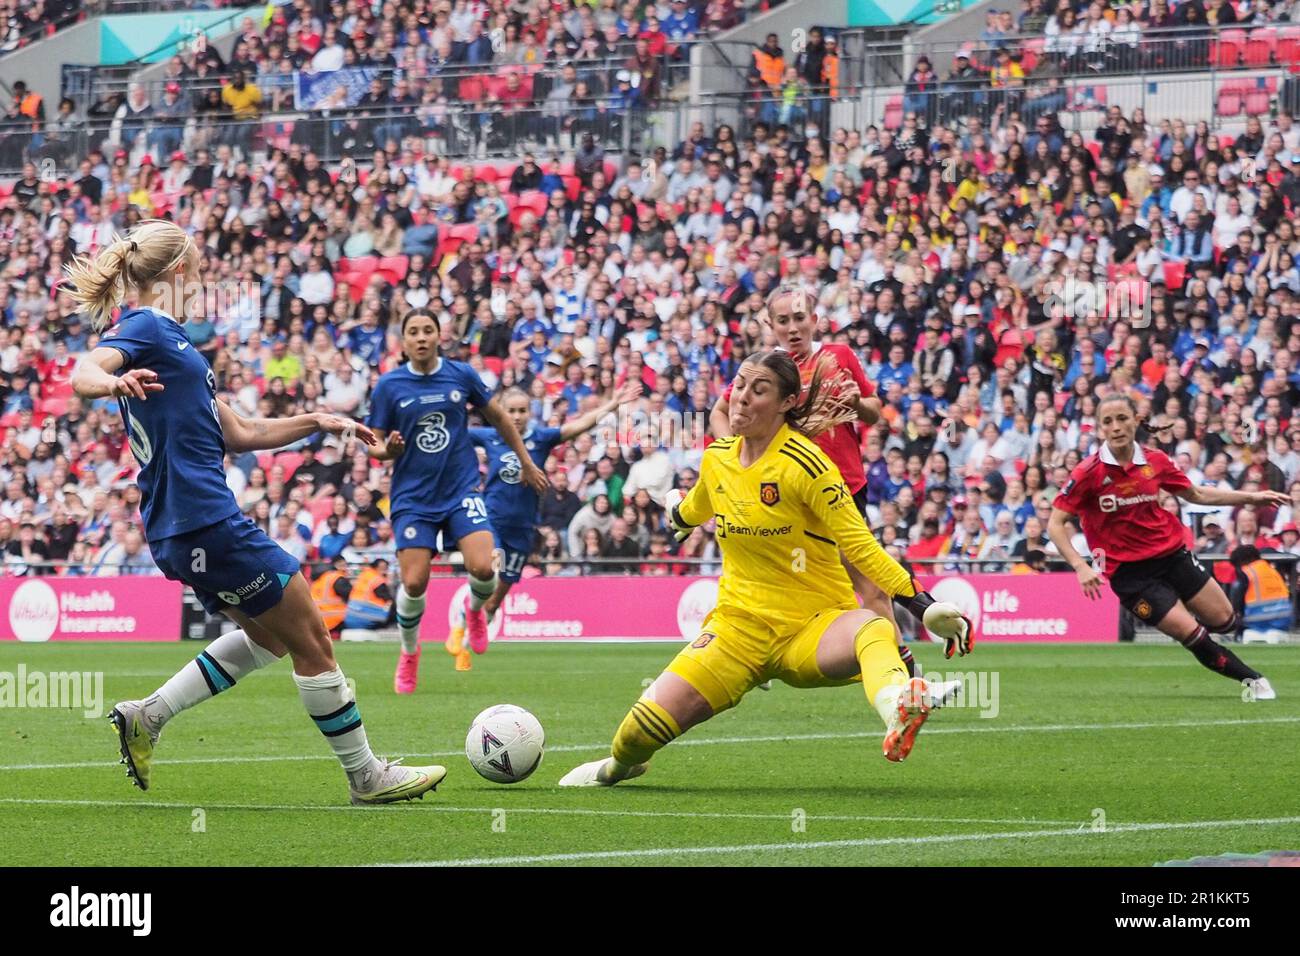 London, UK. 14th May, 2023. Goalkeeper Mary Earps (27 Manchester United) saves a shot from Pernille Harder (23 Chelsea) during the Vitality Womens FA Cup final between Chelsea and Manchester United at Wembley Stadium in London, England (Natalie Mincher/SPP) Credit: SPP Sport Press Photo. /Alamy Live News Stock Photo